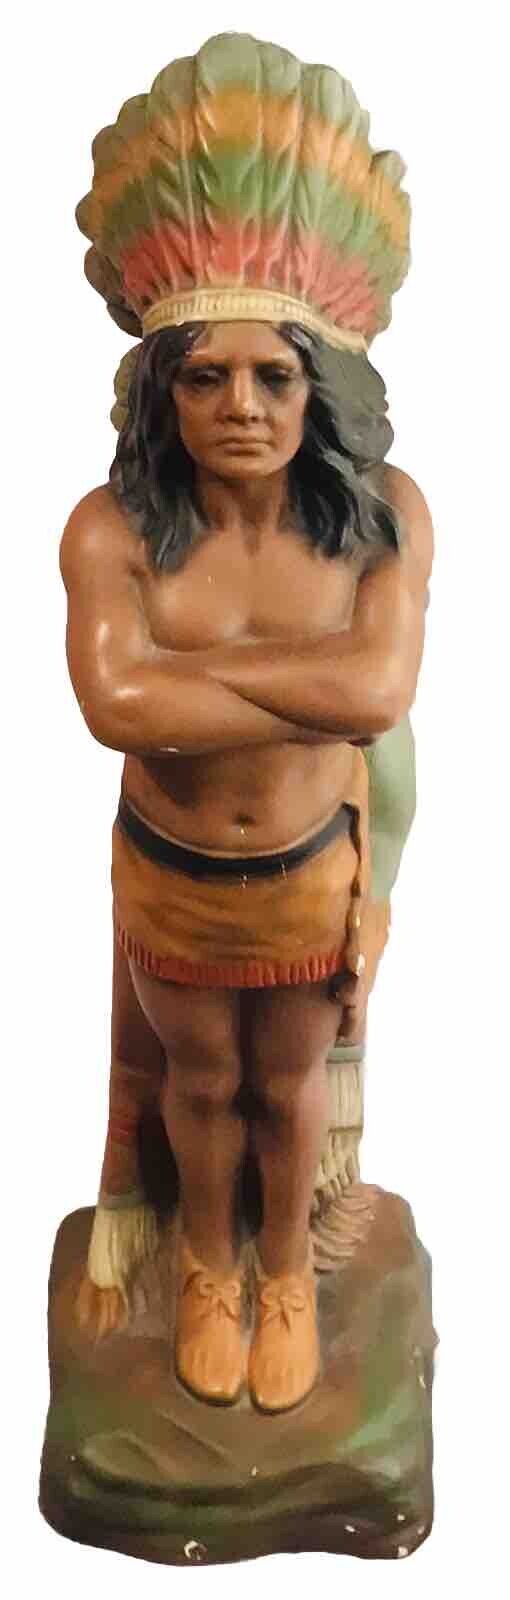 VINTAGE 1960’s NATIVE AMERICAN INDIAN CHIEF PAINTED CERAMIC FIGURE 15”